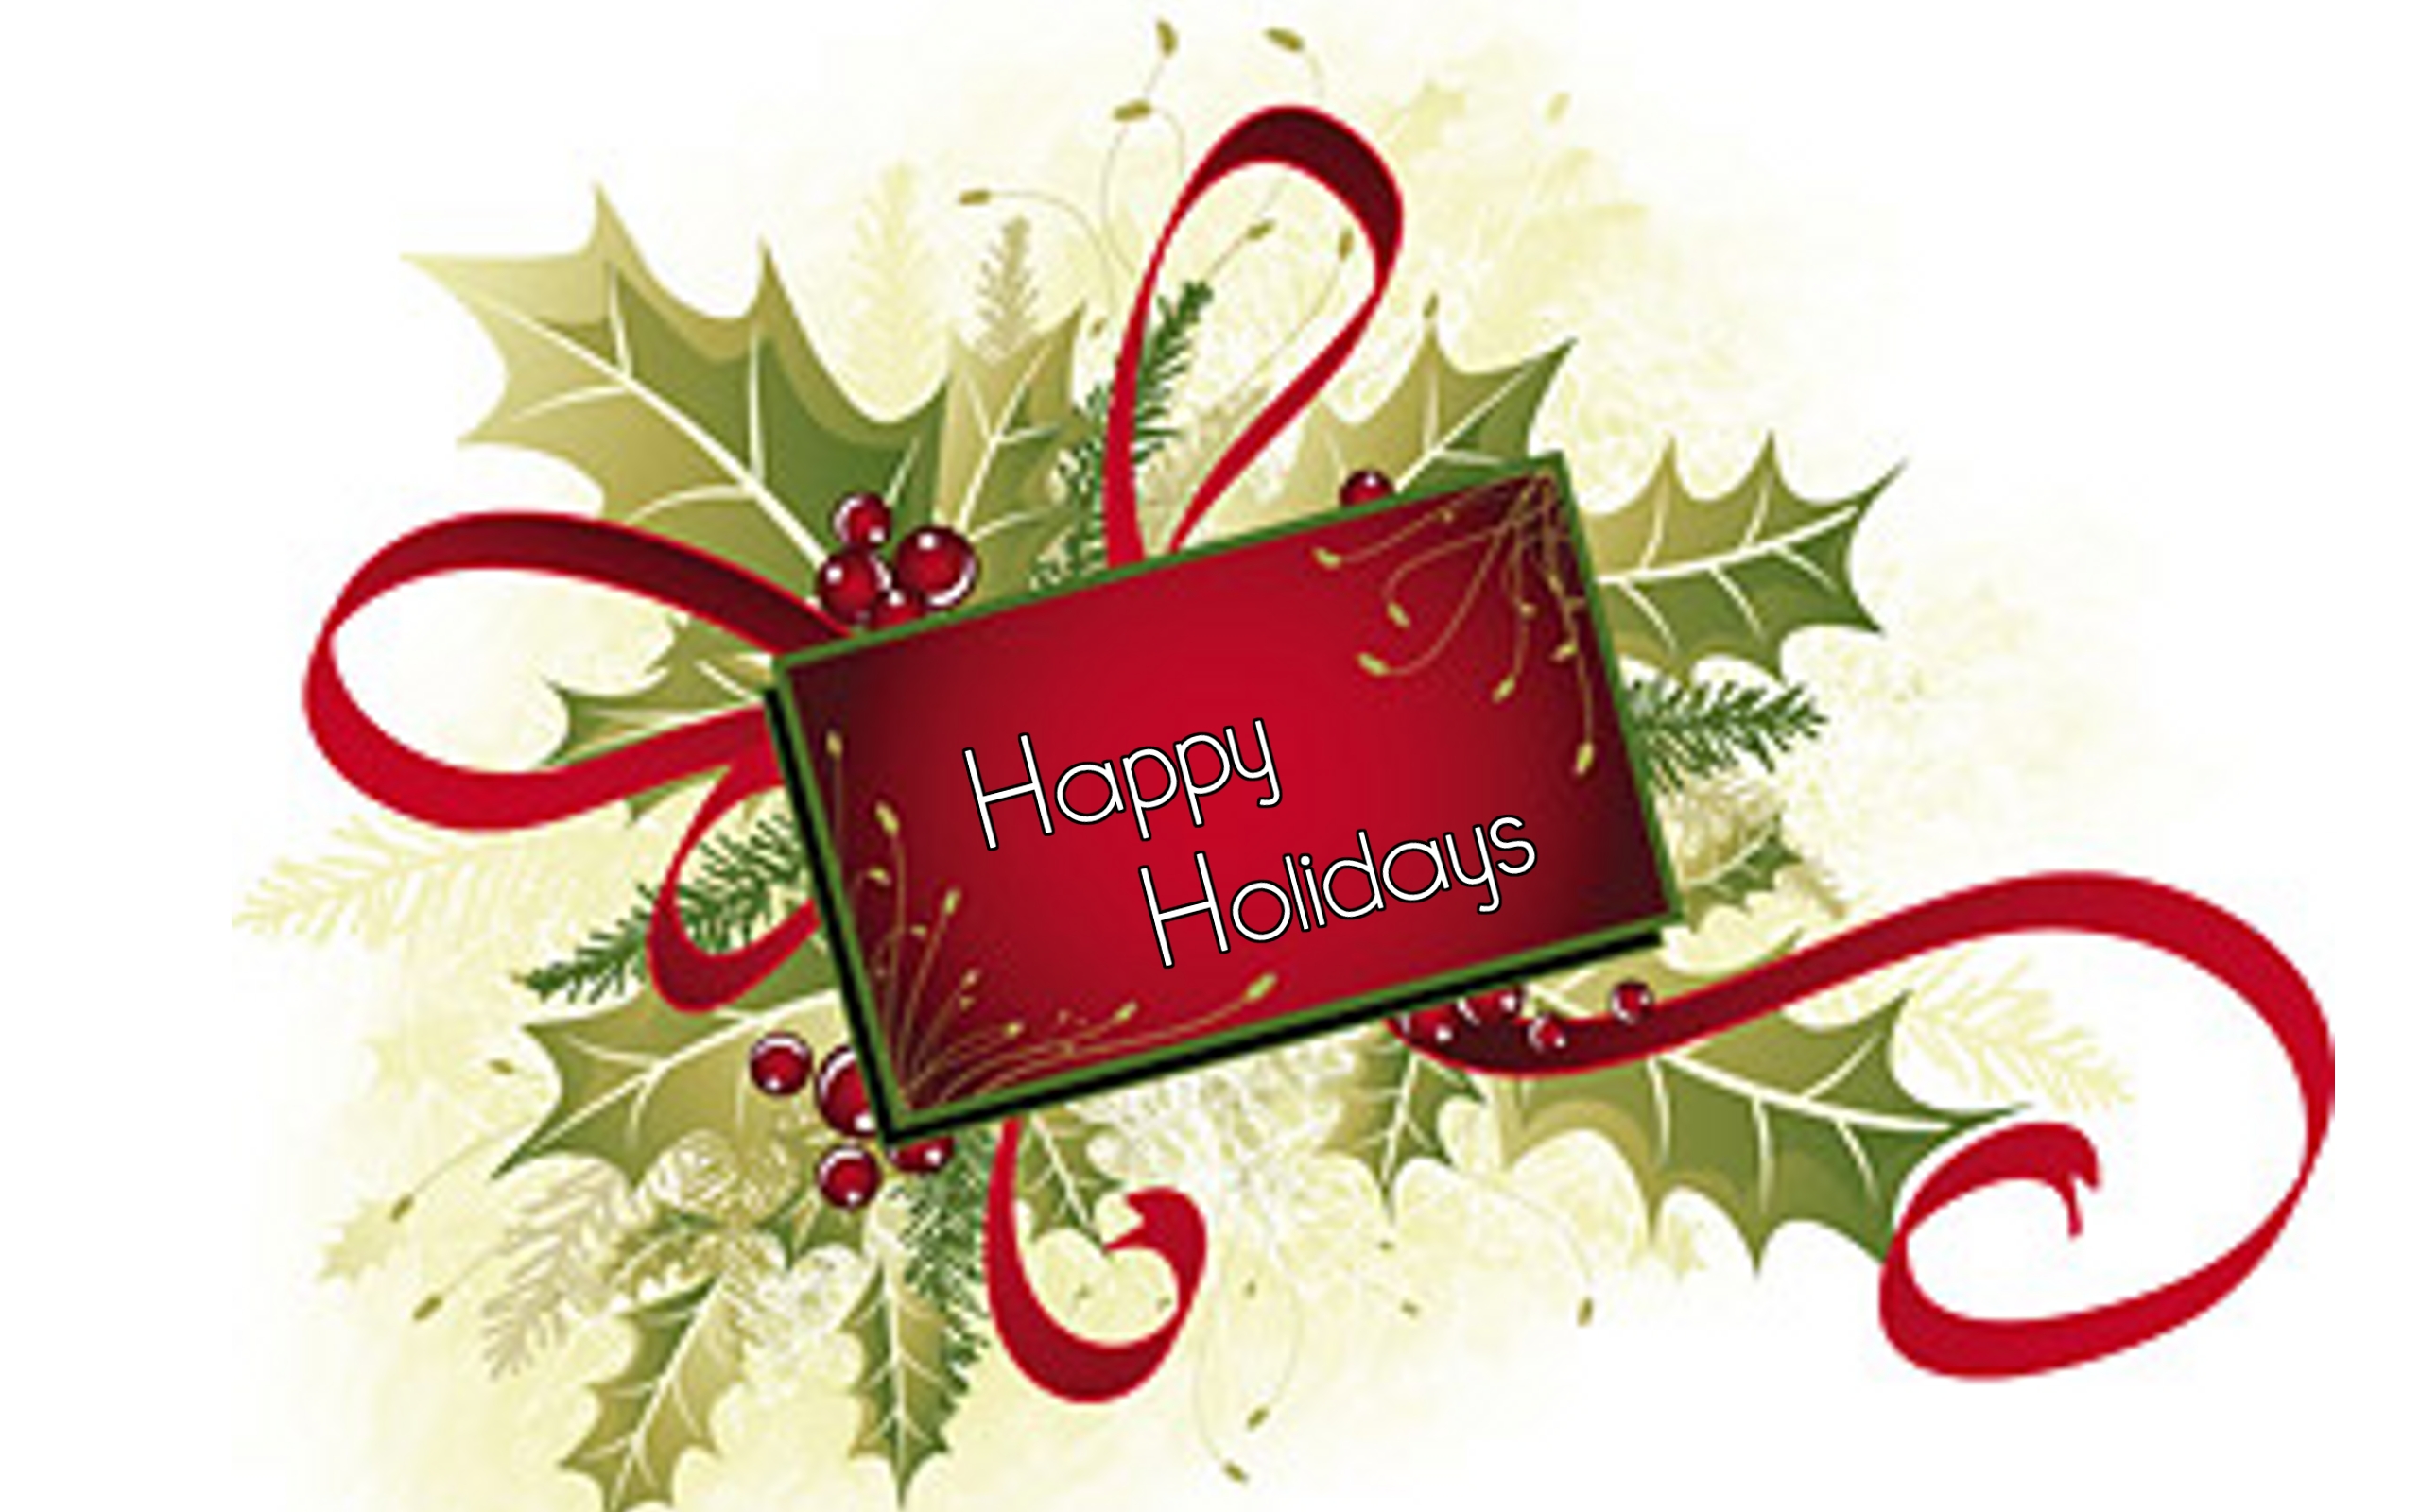 free happy holiday clip art banners - photo #45